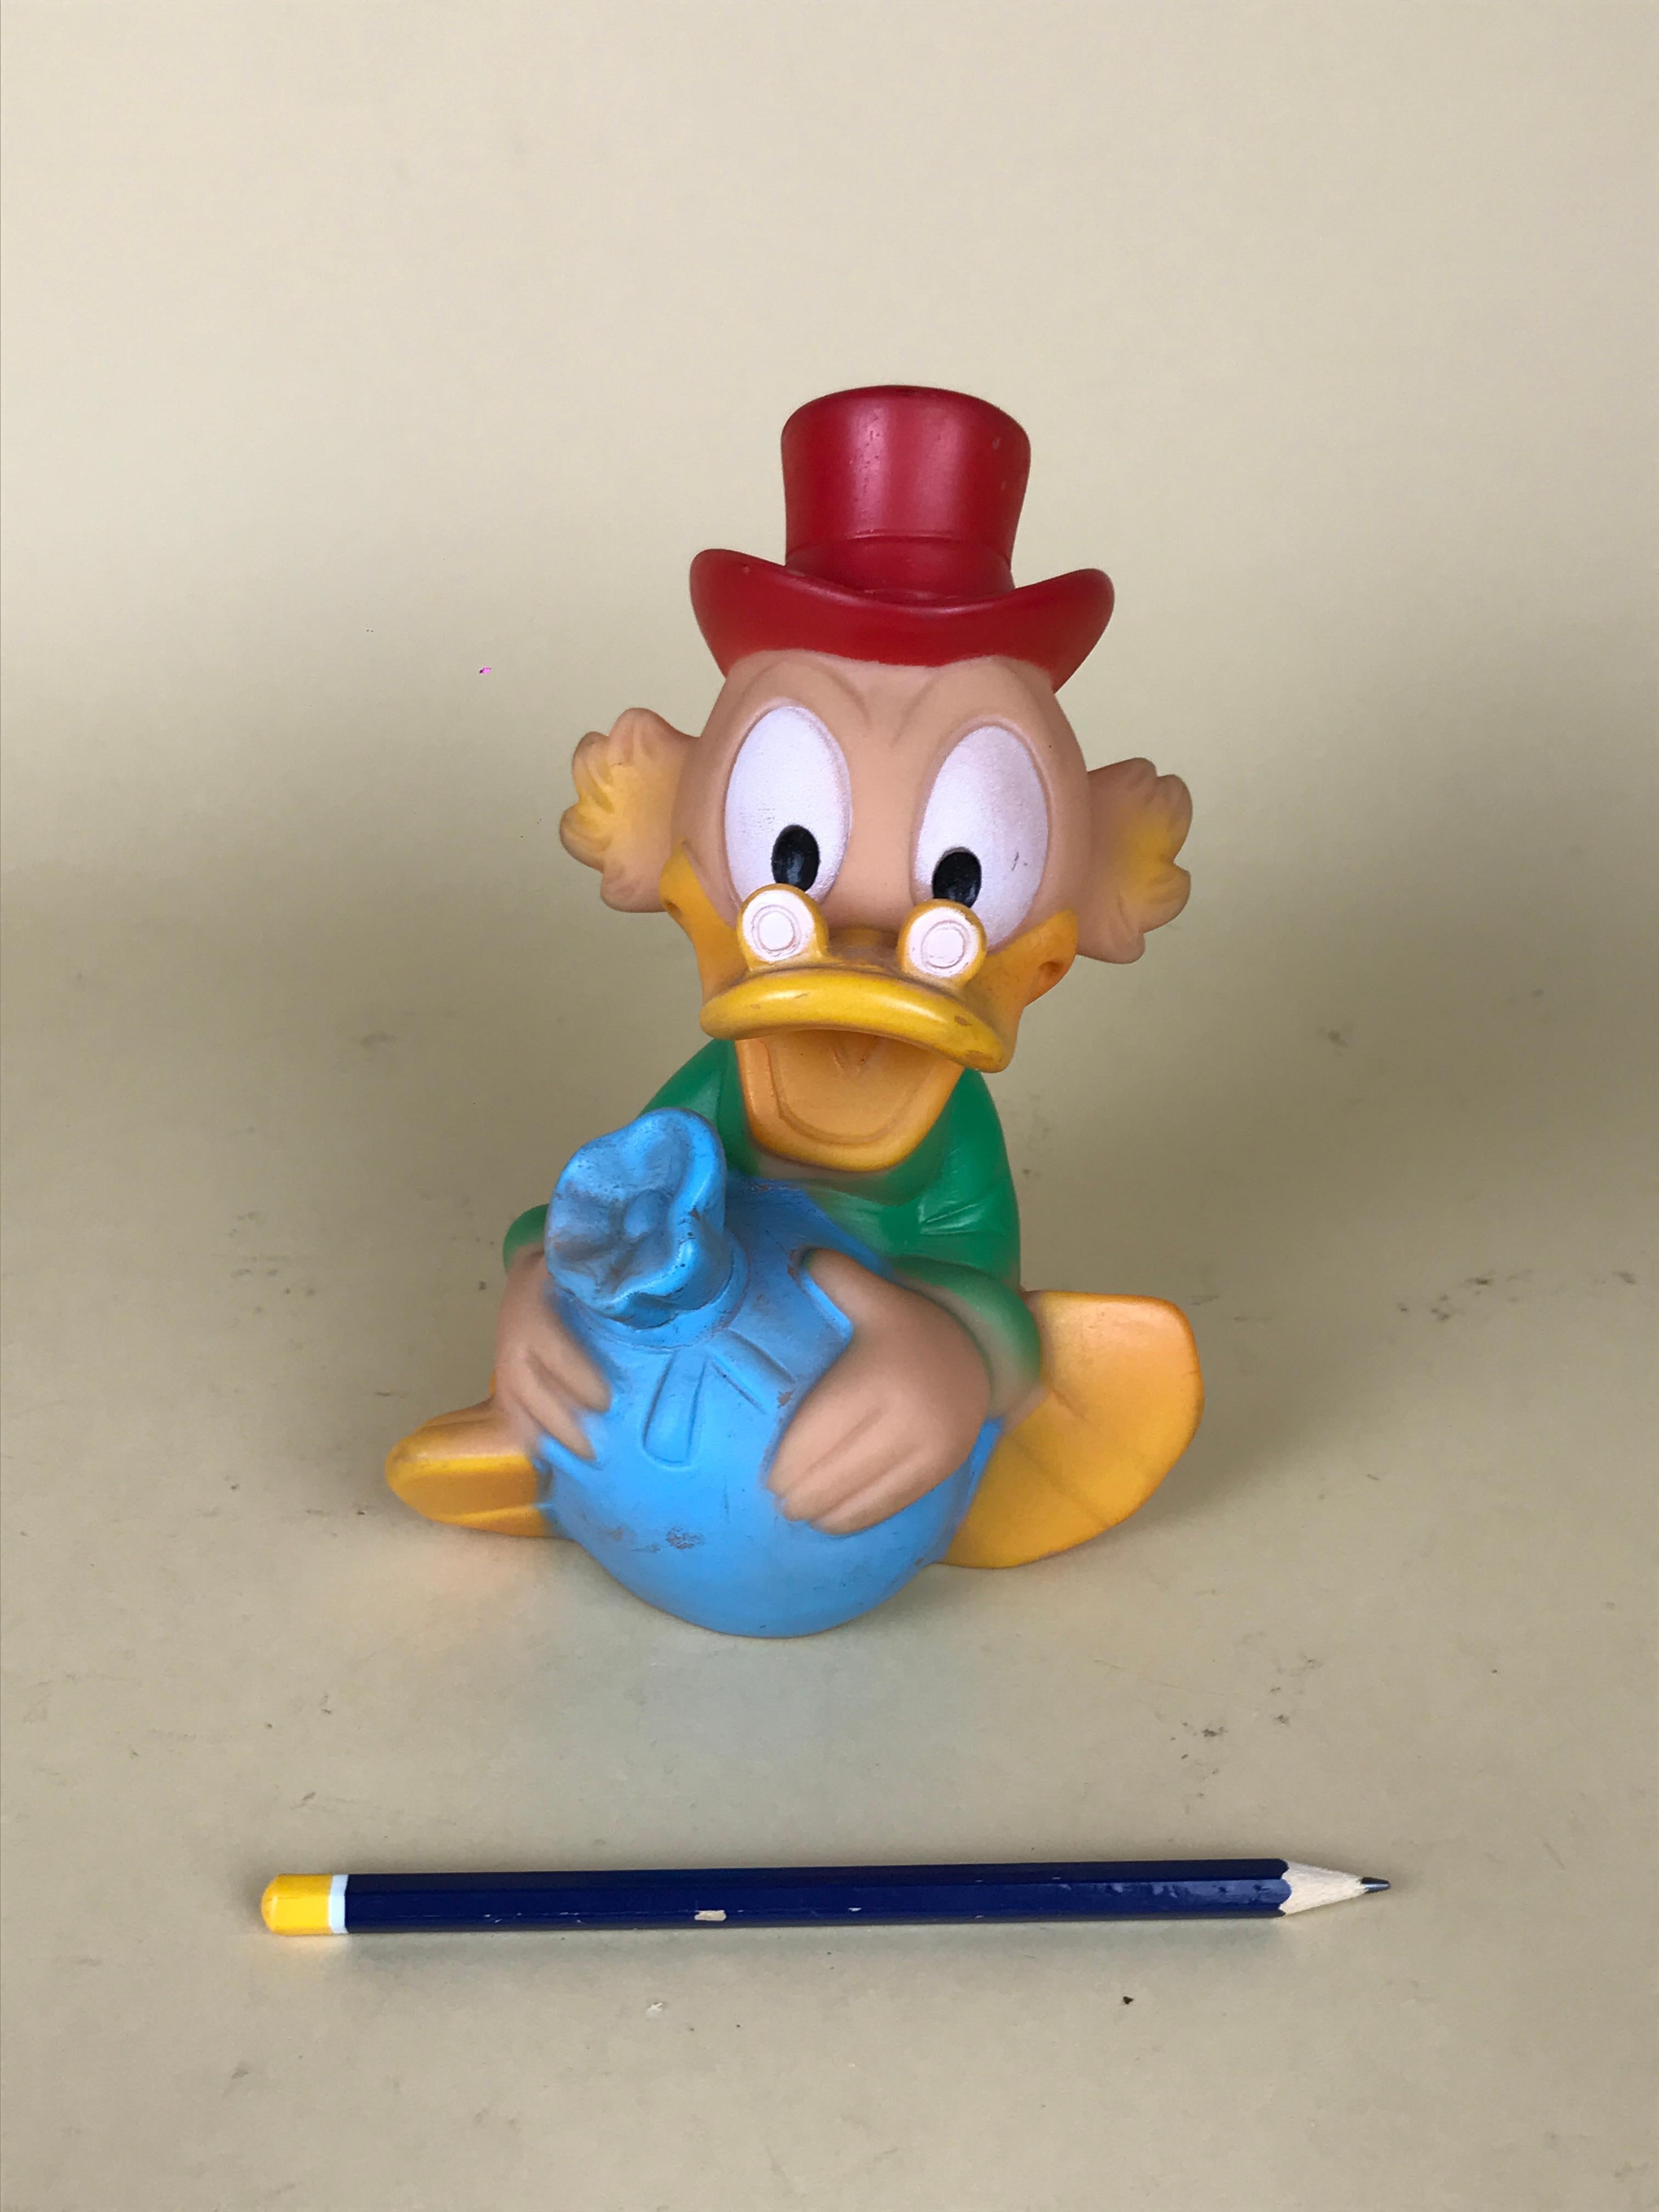 Vintage green, red and blue Uncle Scrooge squeak rubber toy with hat and a bag of coins made by Jugasa in Spain the 1960s for Disney.

Marked 